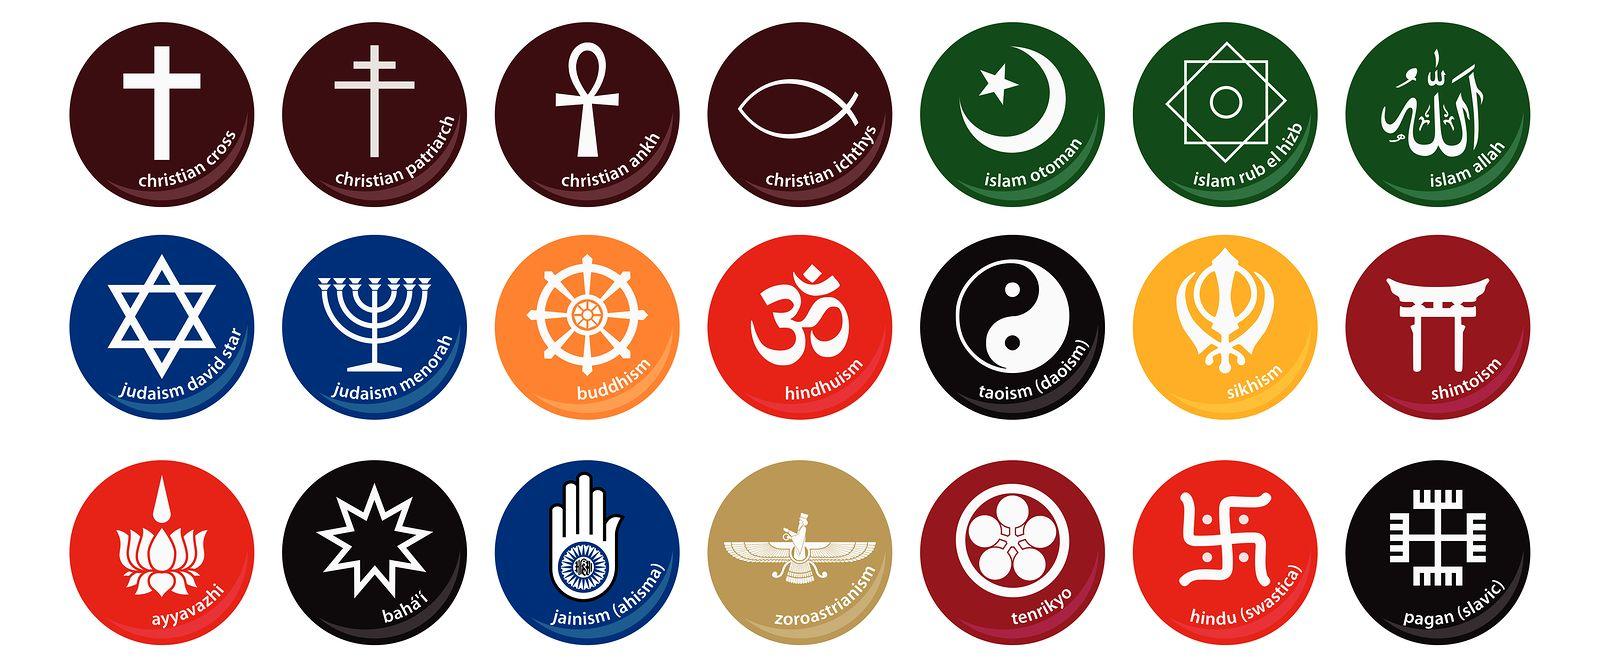 Hindu Religion Logo - You Can Be Indian and Not Hindu: An Agnostic Indian's Thoughts ...